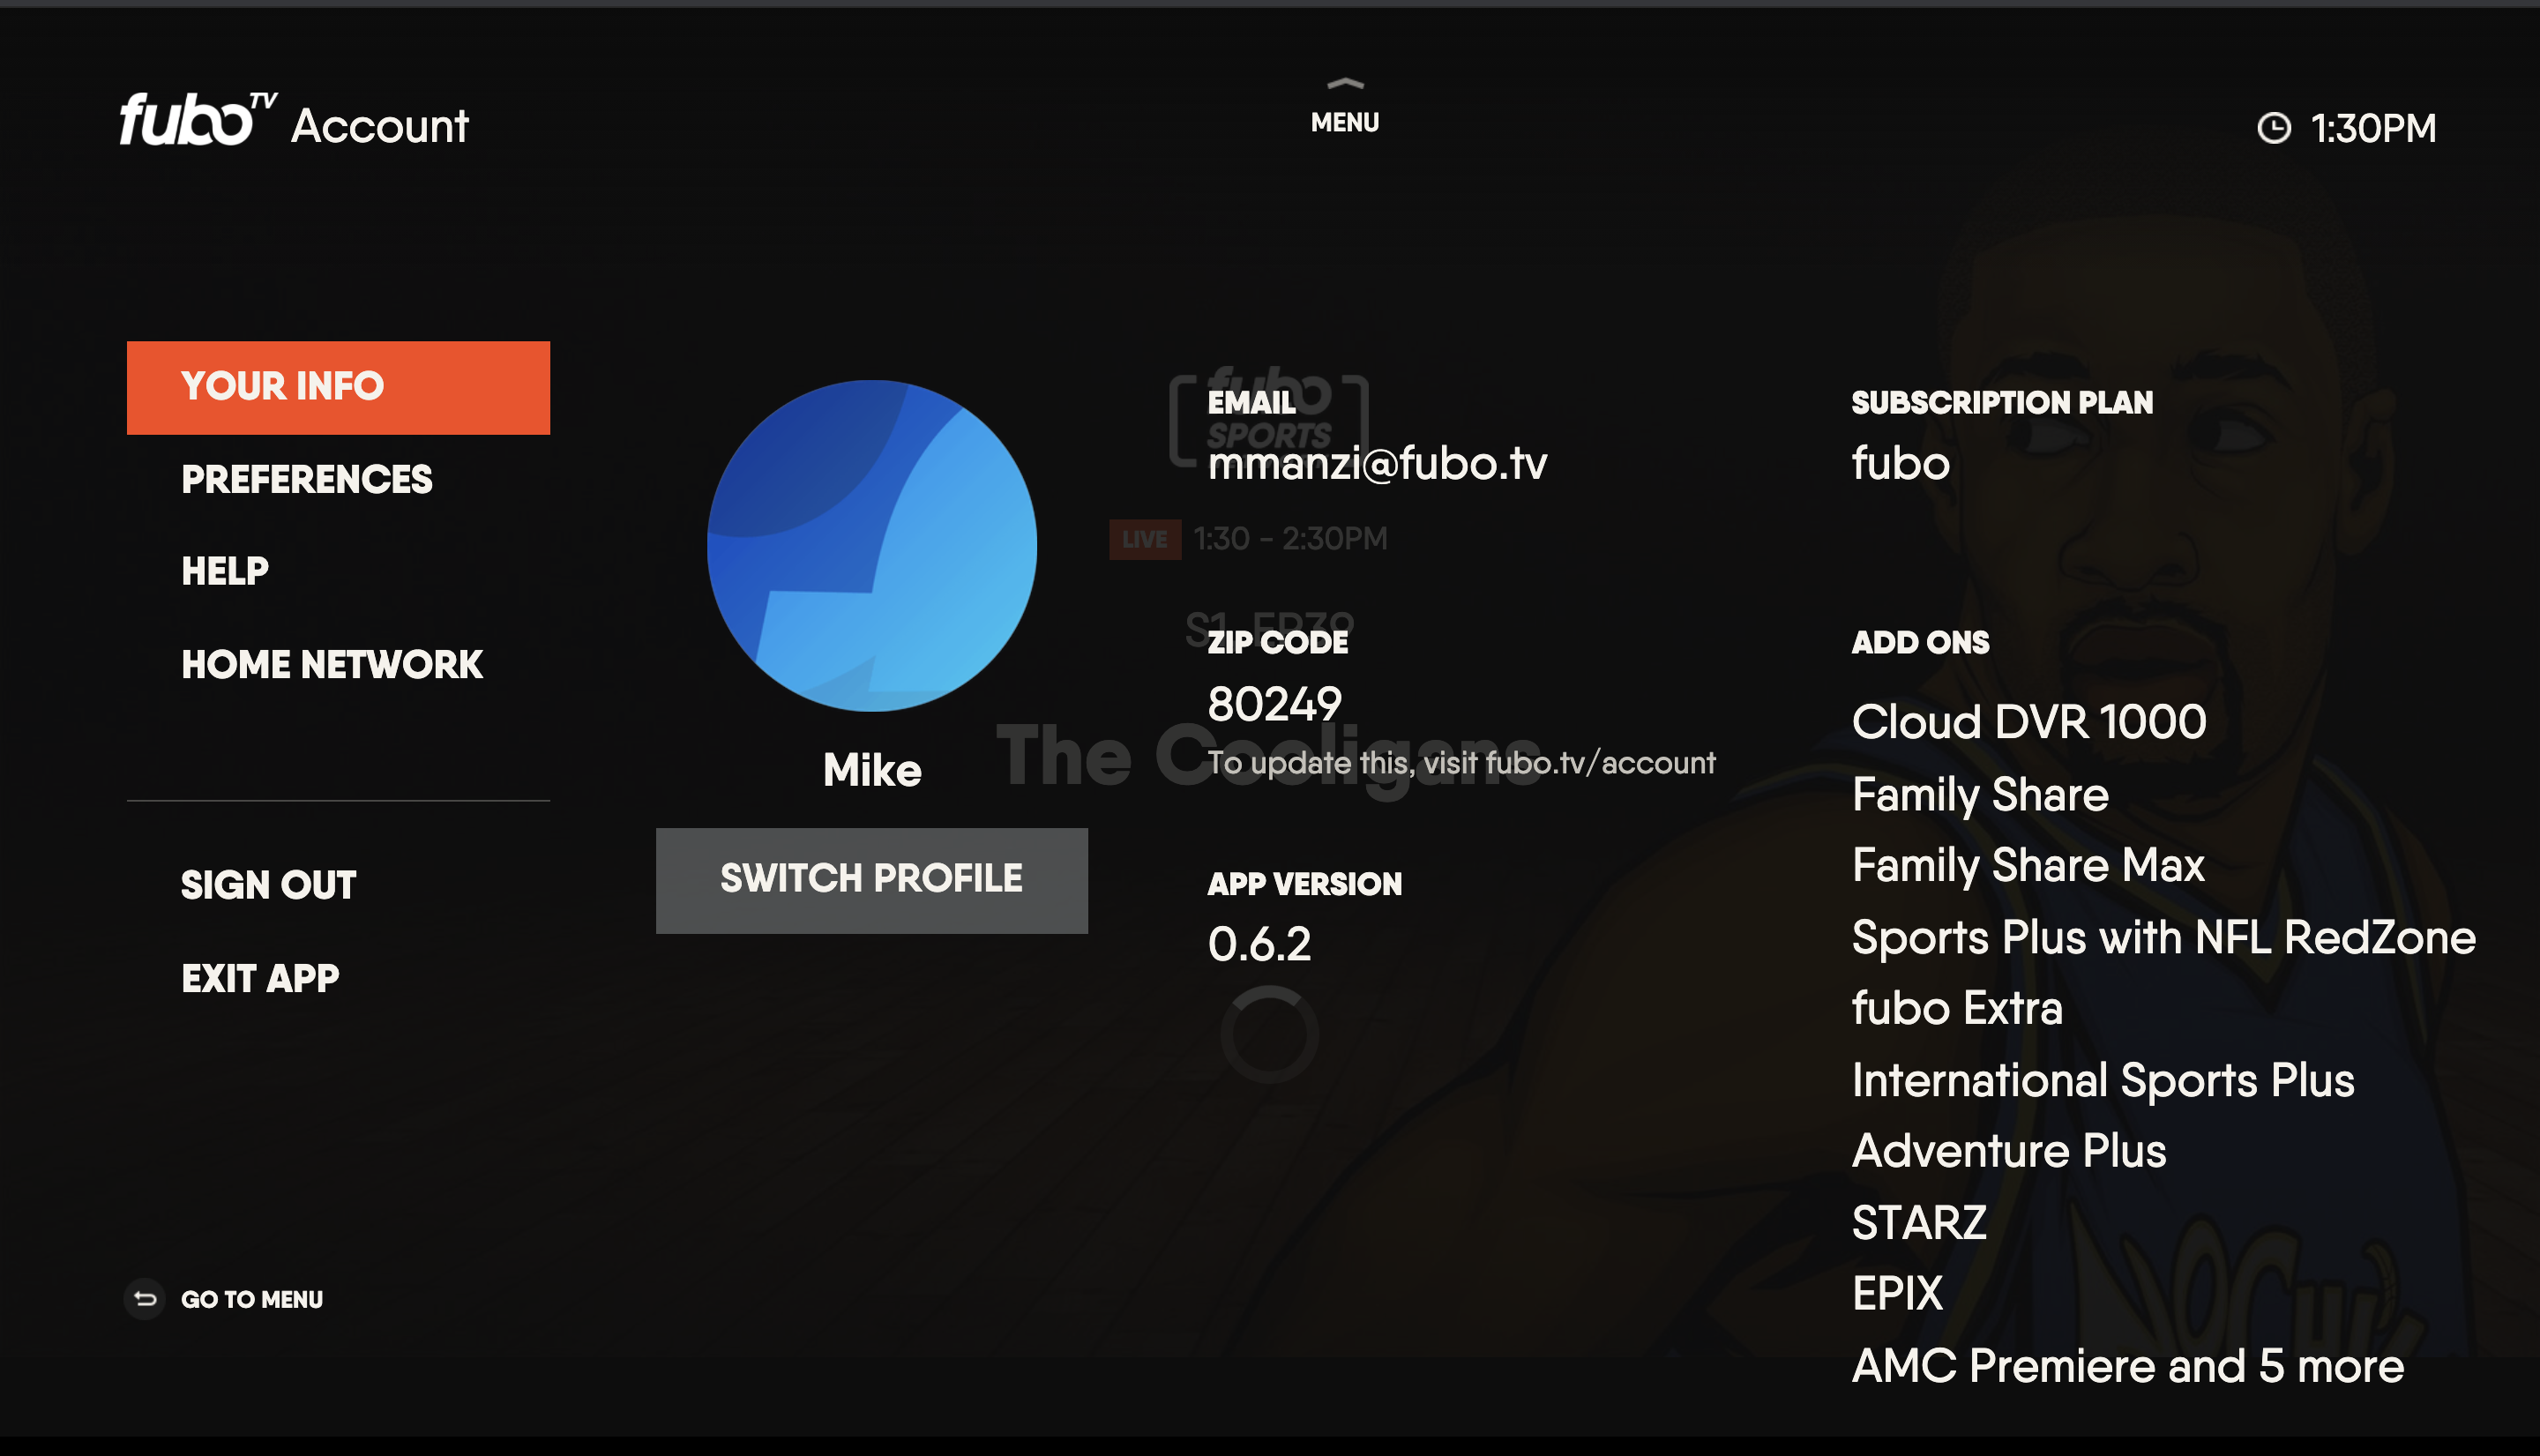 ACCOUNT screen of the FuboTV app on Hisense TV, accessible by selecting the profile icon in the top menu